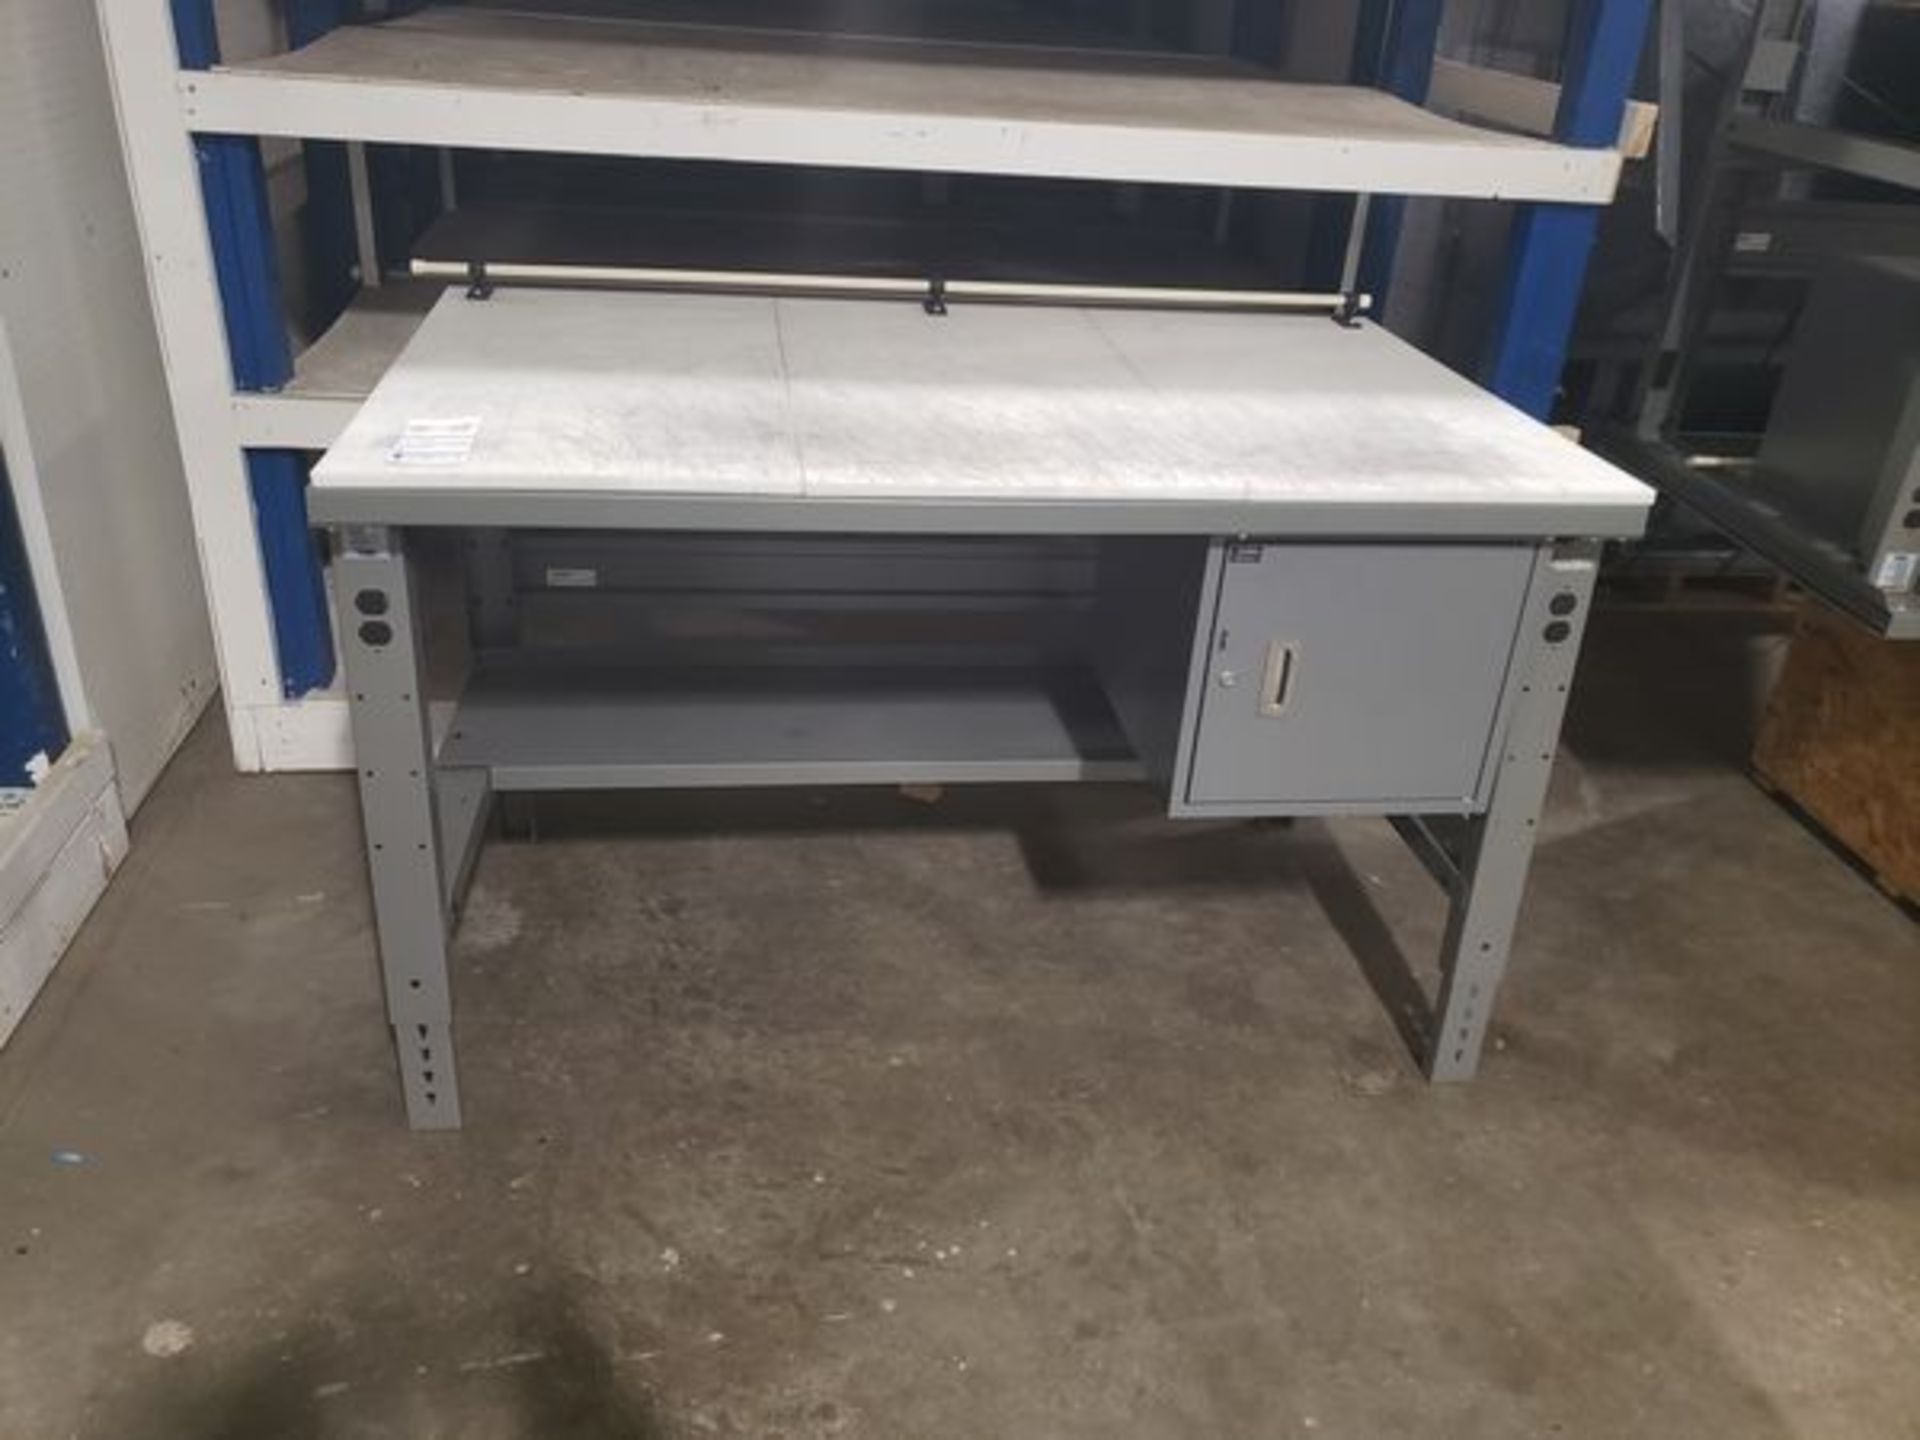 METAL SHOP DESK WITH CUTTING BOARD TOP 5' X 36"